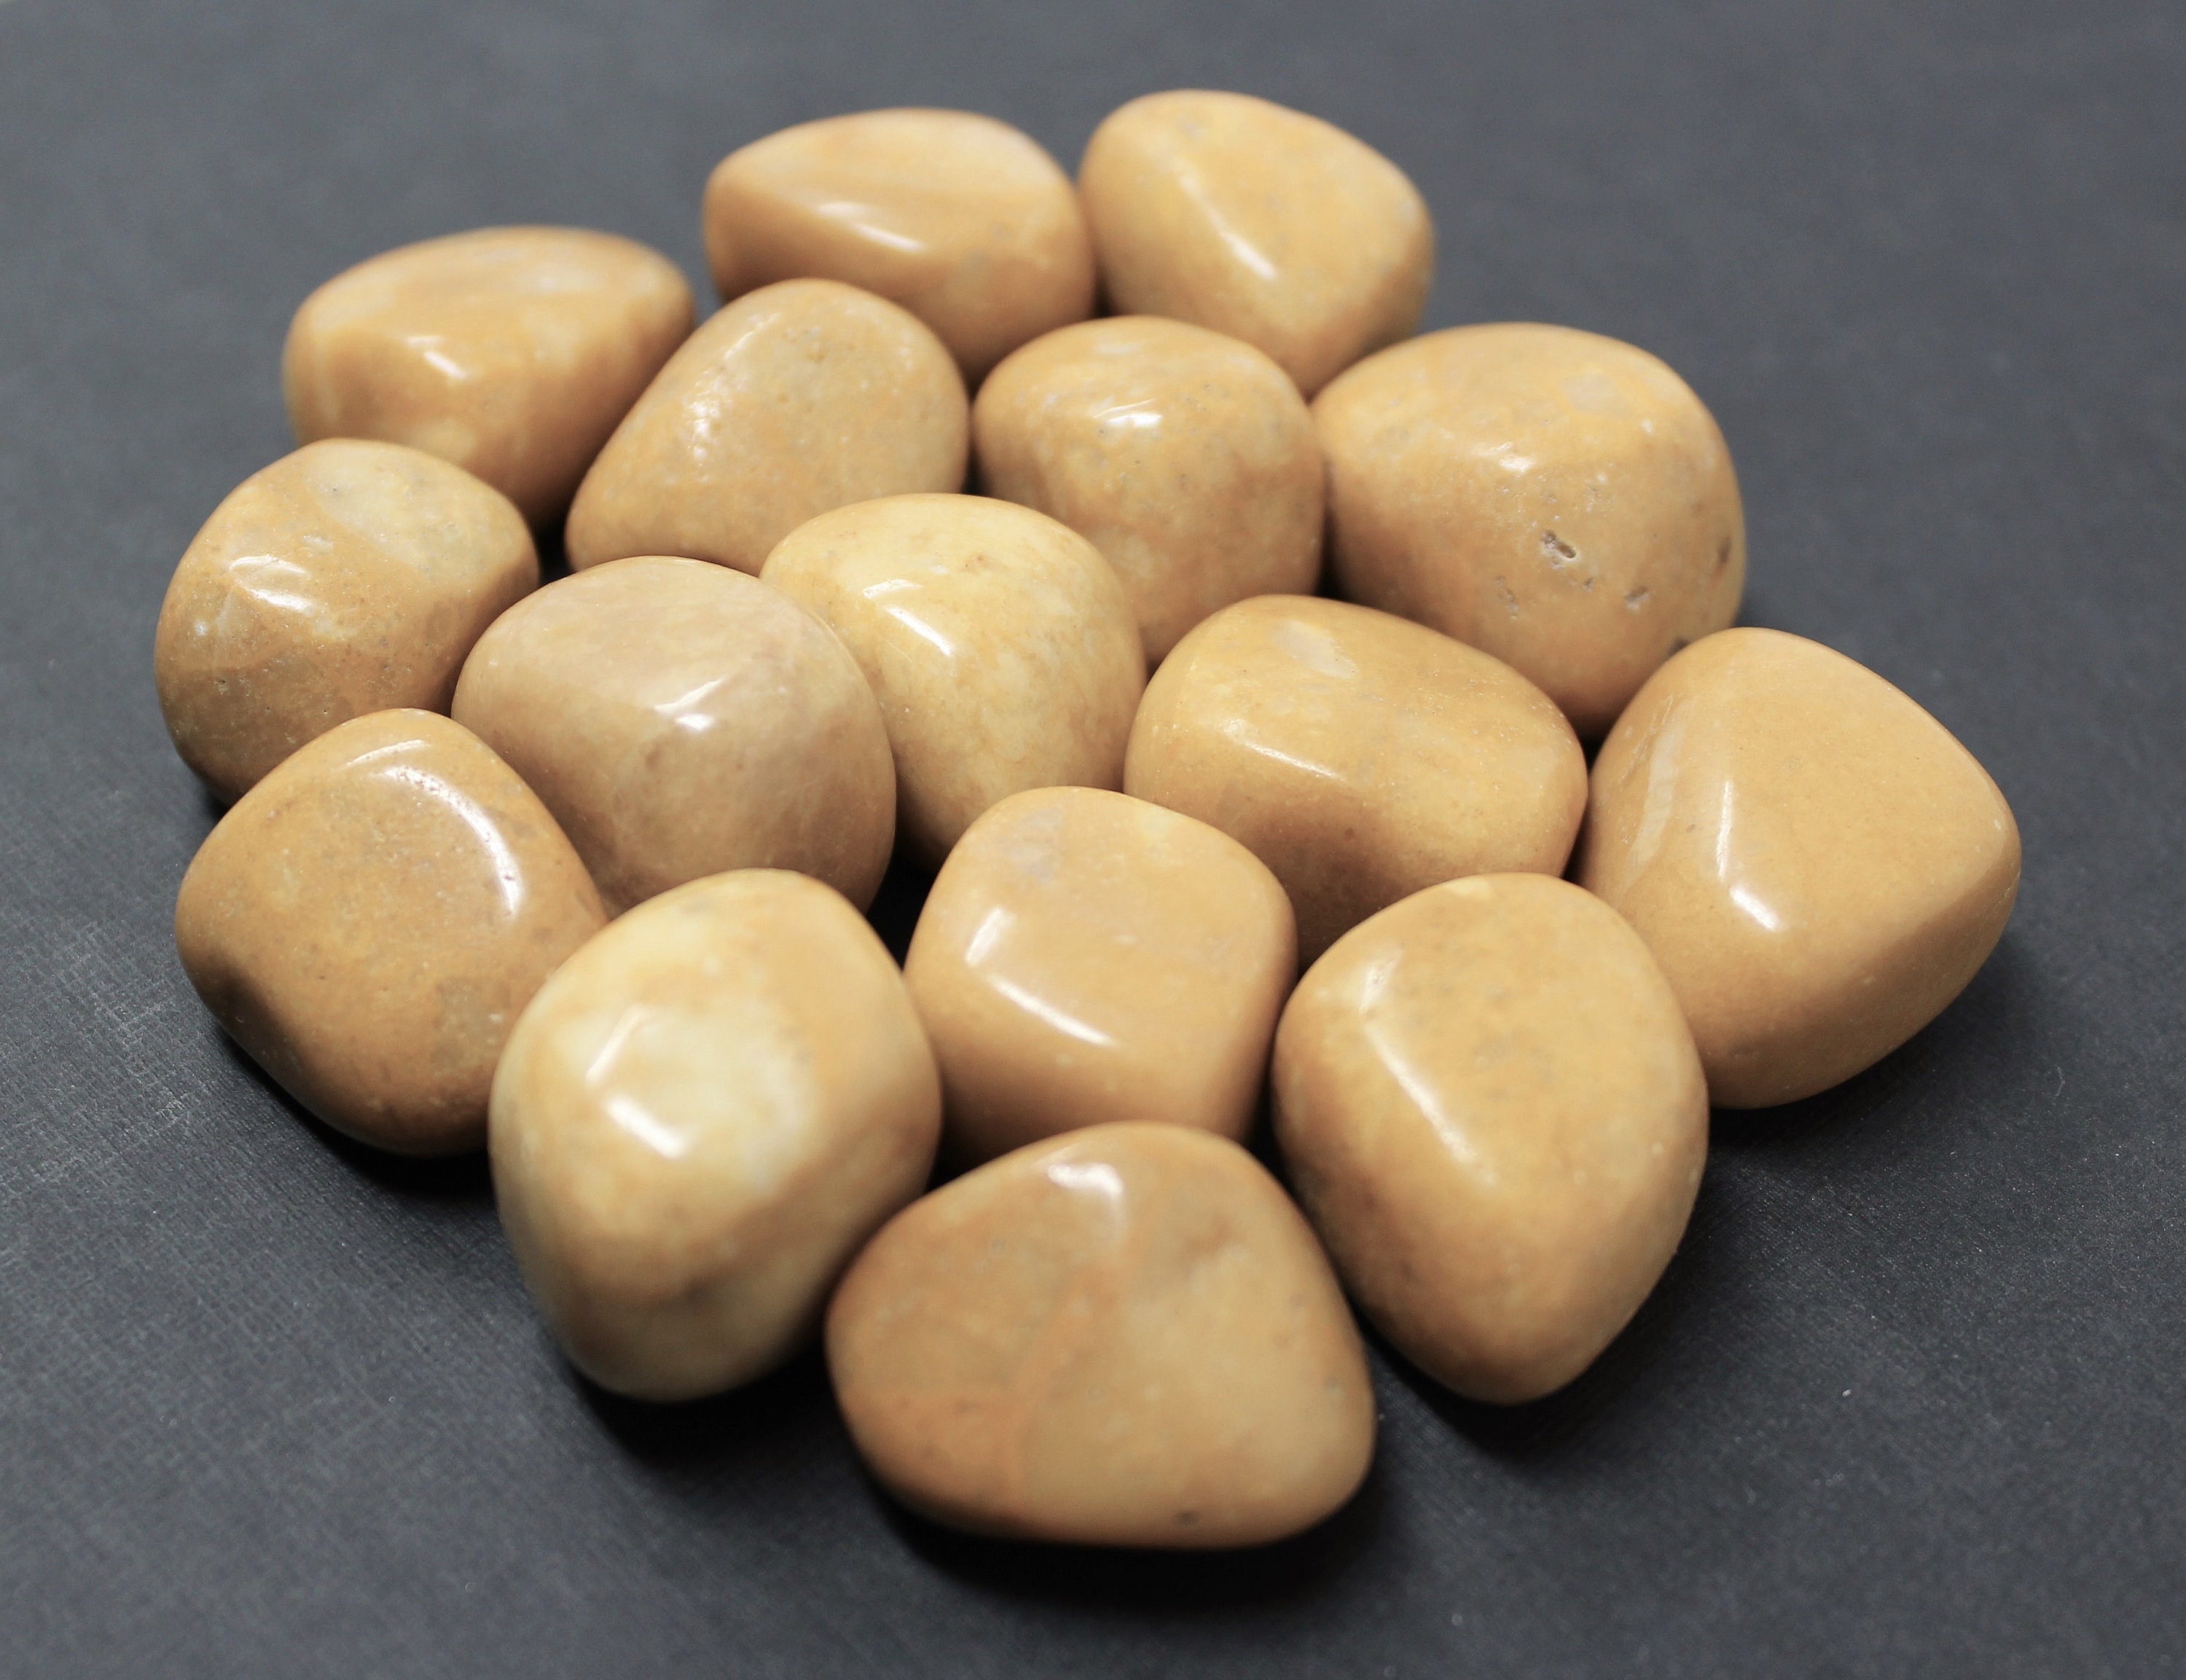 Yellow Jasper Tumbled Stones Choose How Many Pieces Tumbled Yellow